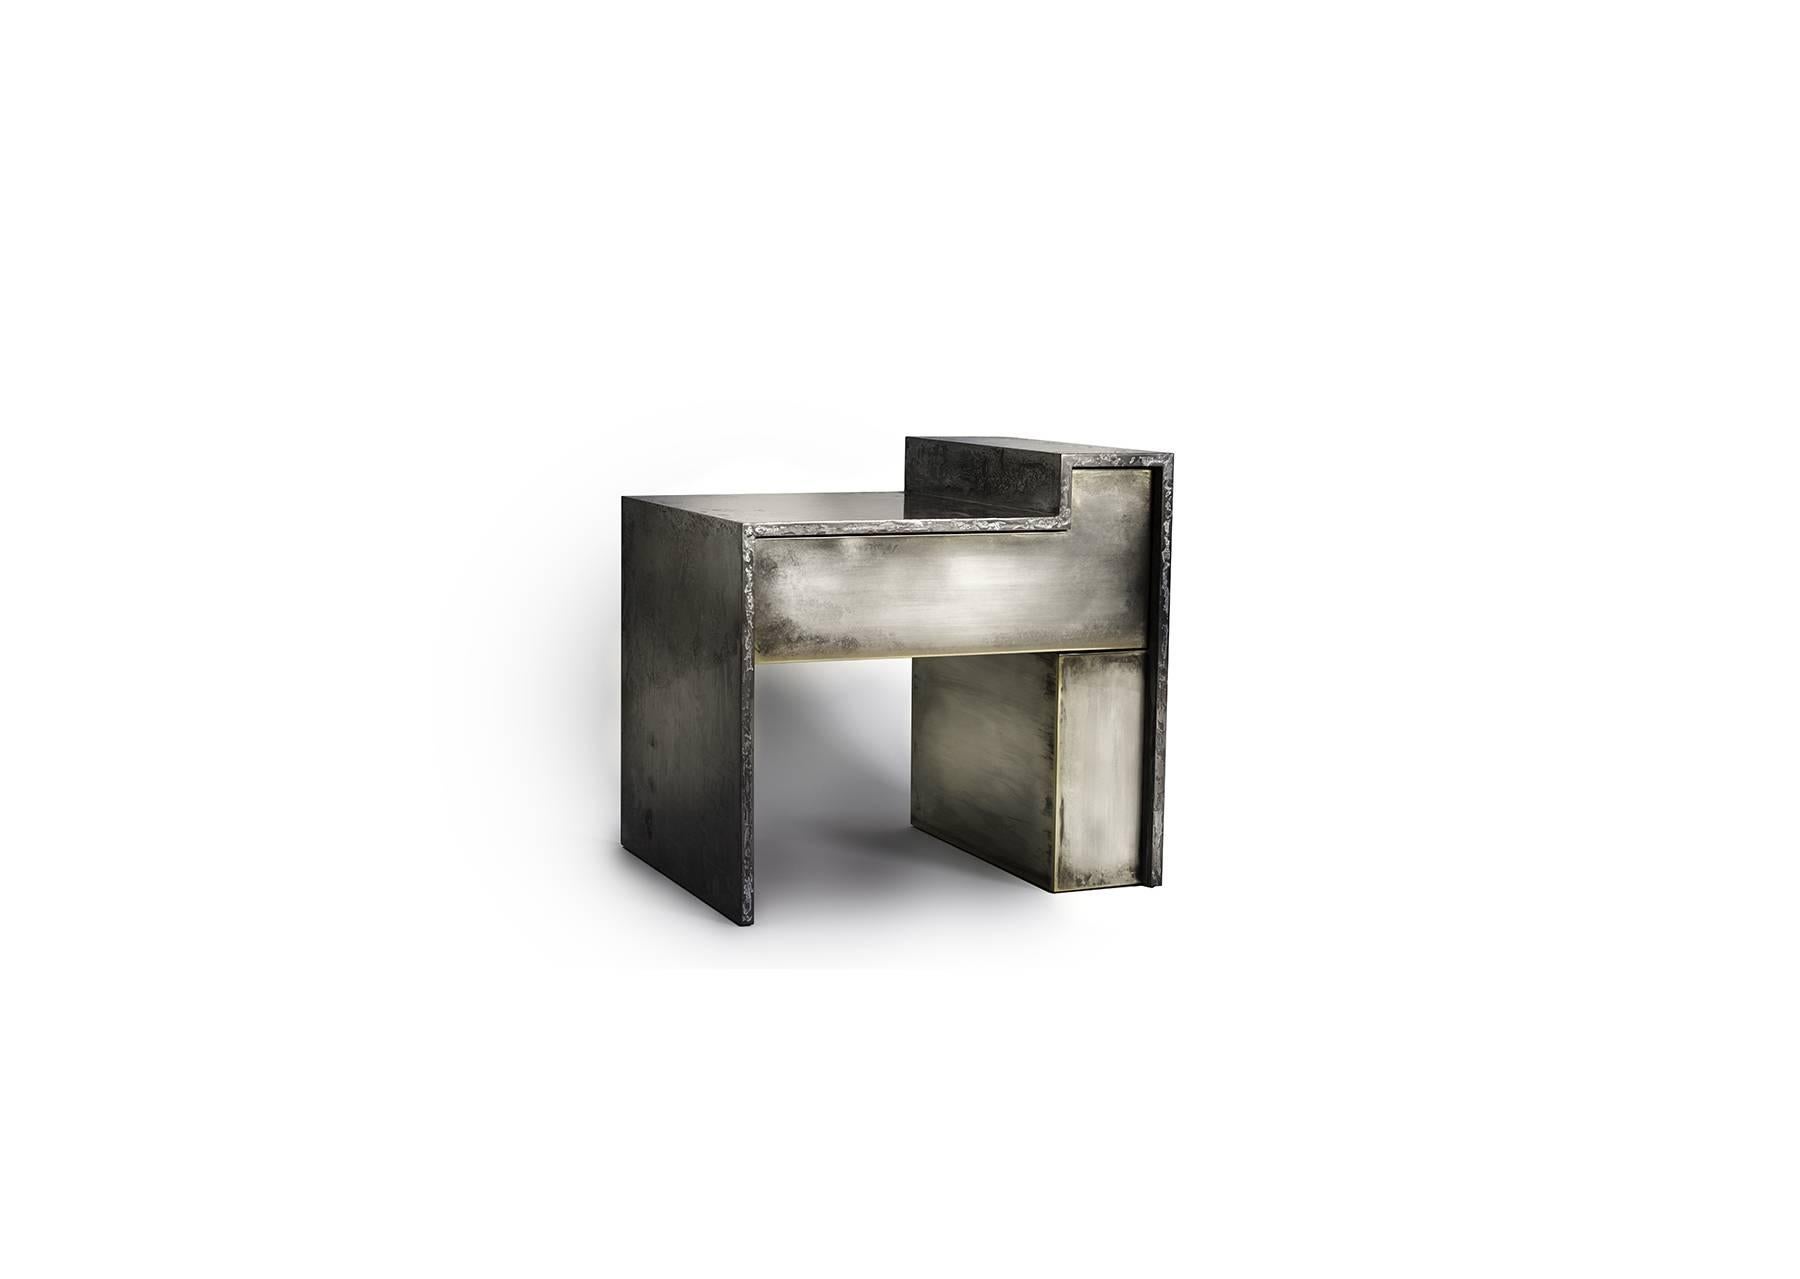 One of the latest creations of modern collectible luxury furniture, the bespoke RLBST bedside table is a nightstand that can be produced in a variety of brass and liquid metal based finishes. As pictured, these tables feature hand silvered brass